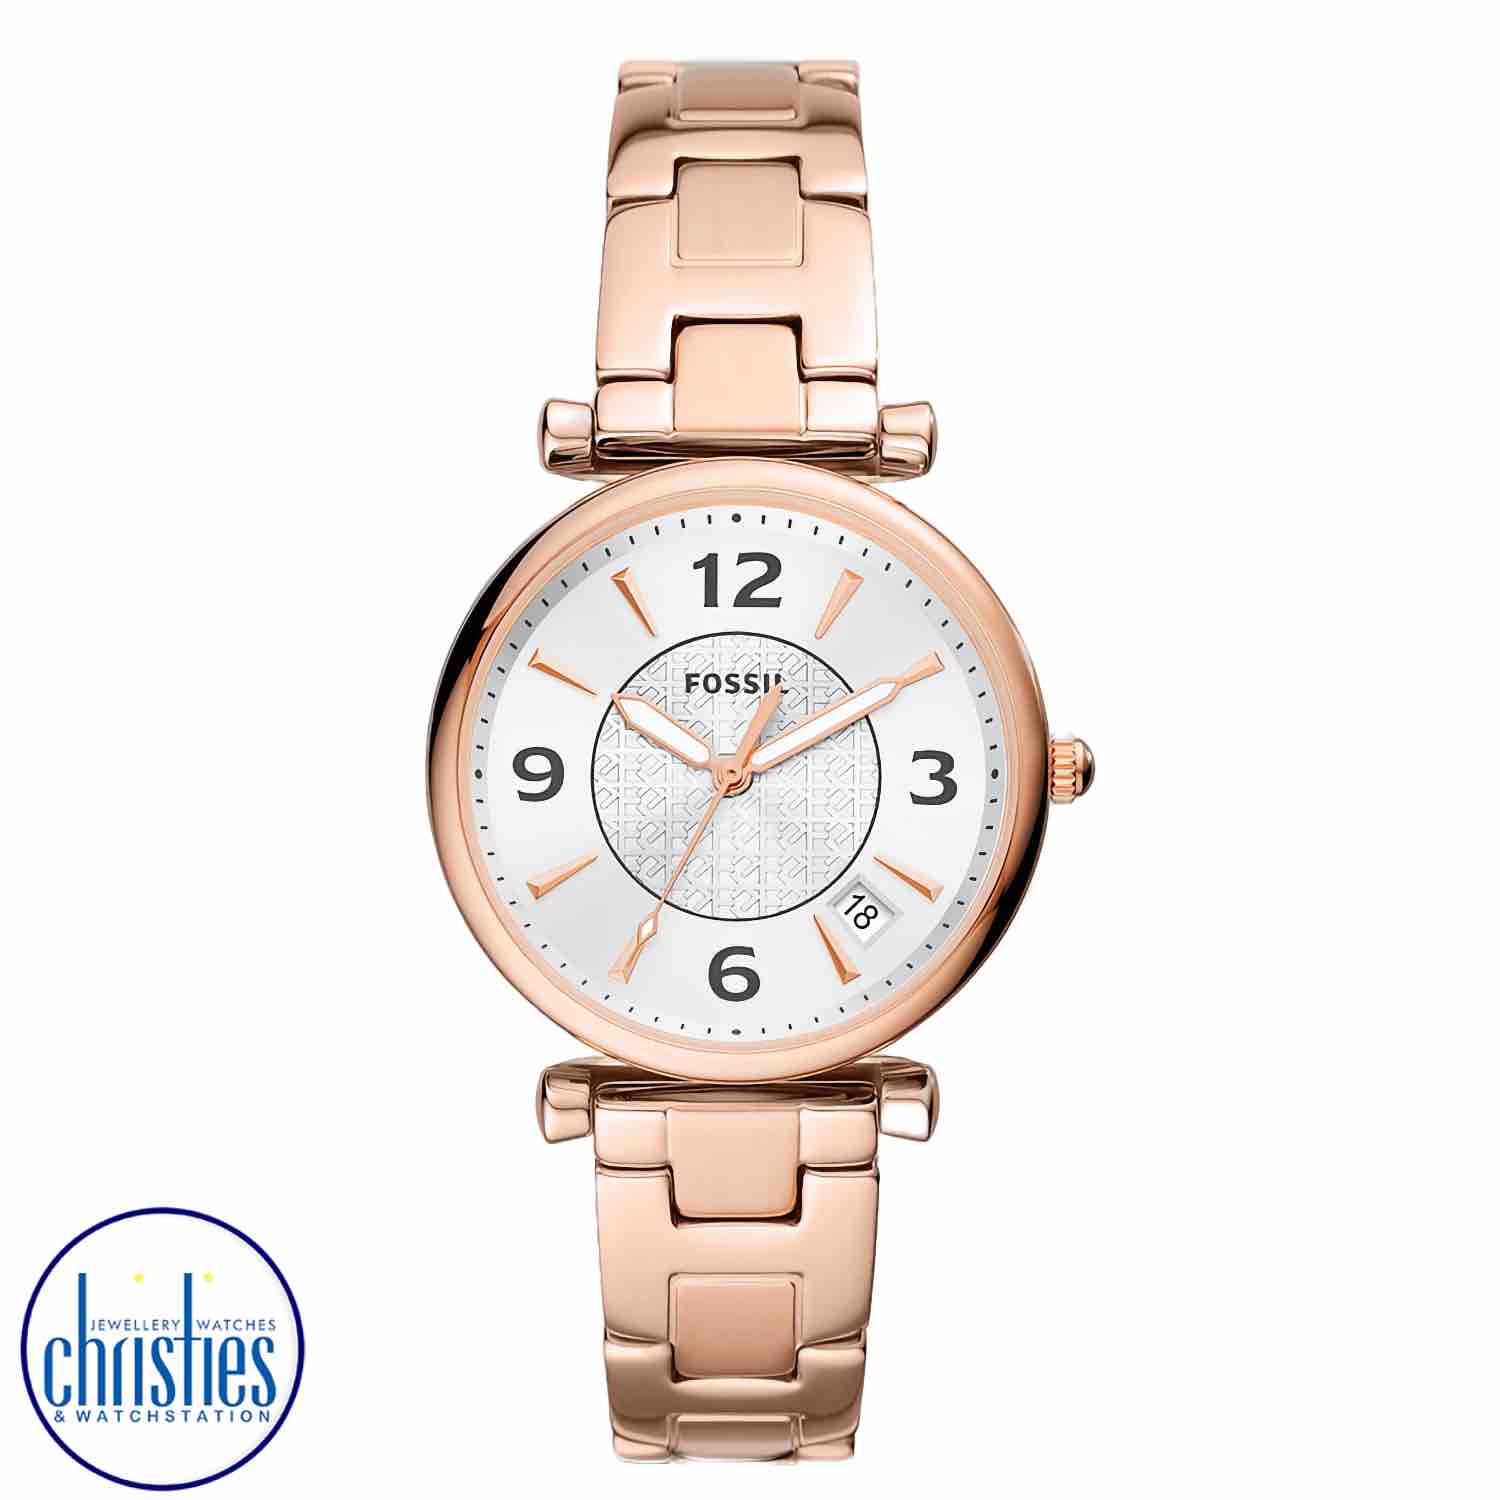 ES5158 Fossil Carlie Rose Gold-Tone Stainless Steel Watch fossil smart watches nz